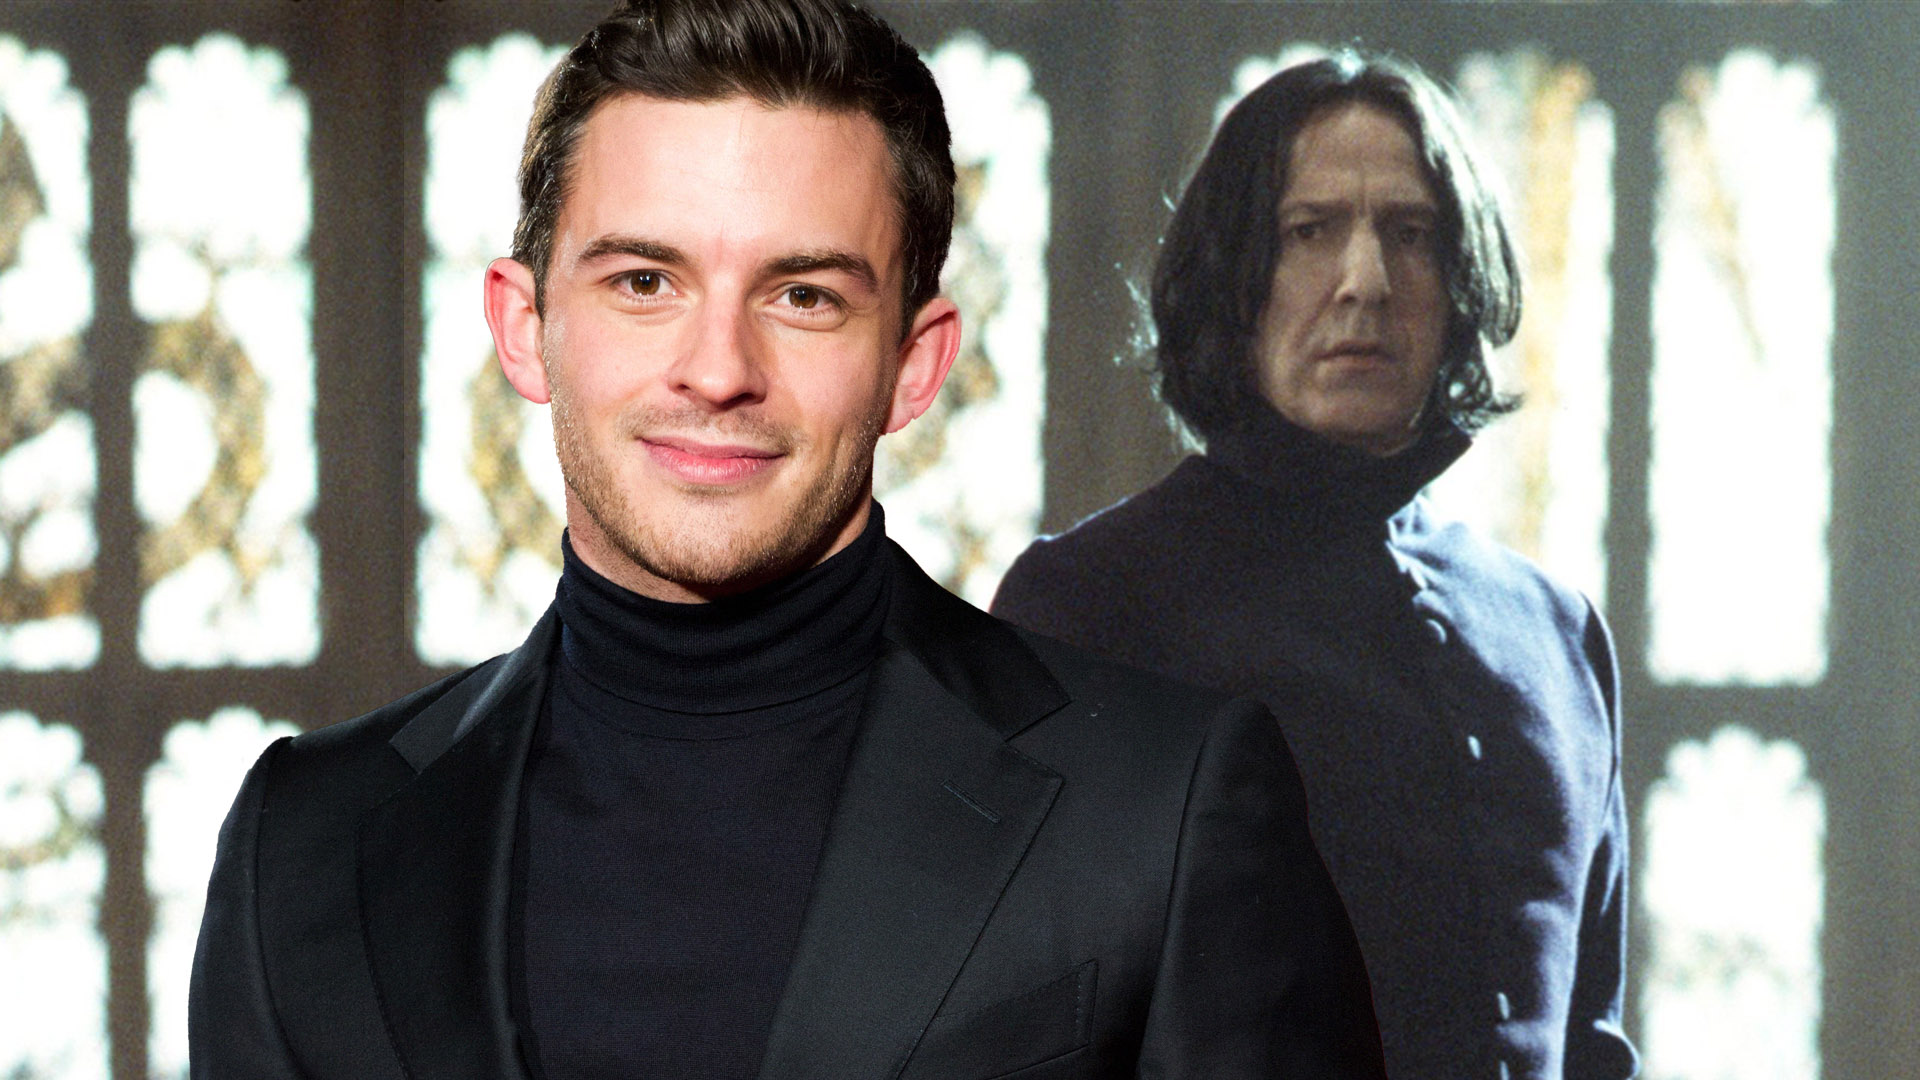 7 Actors Who Could Play Snape in Harry Potter TV Reboot, Ranked